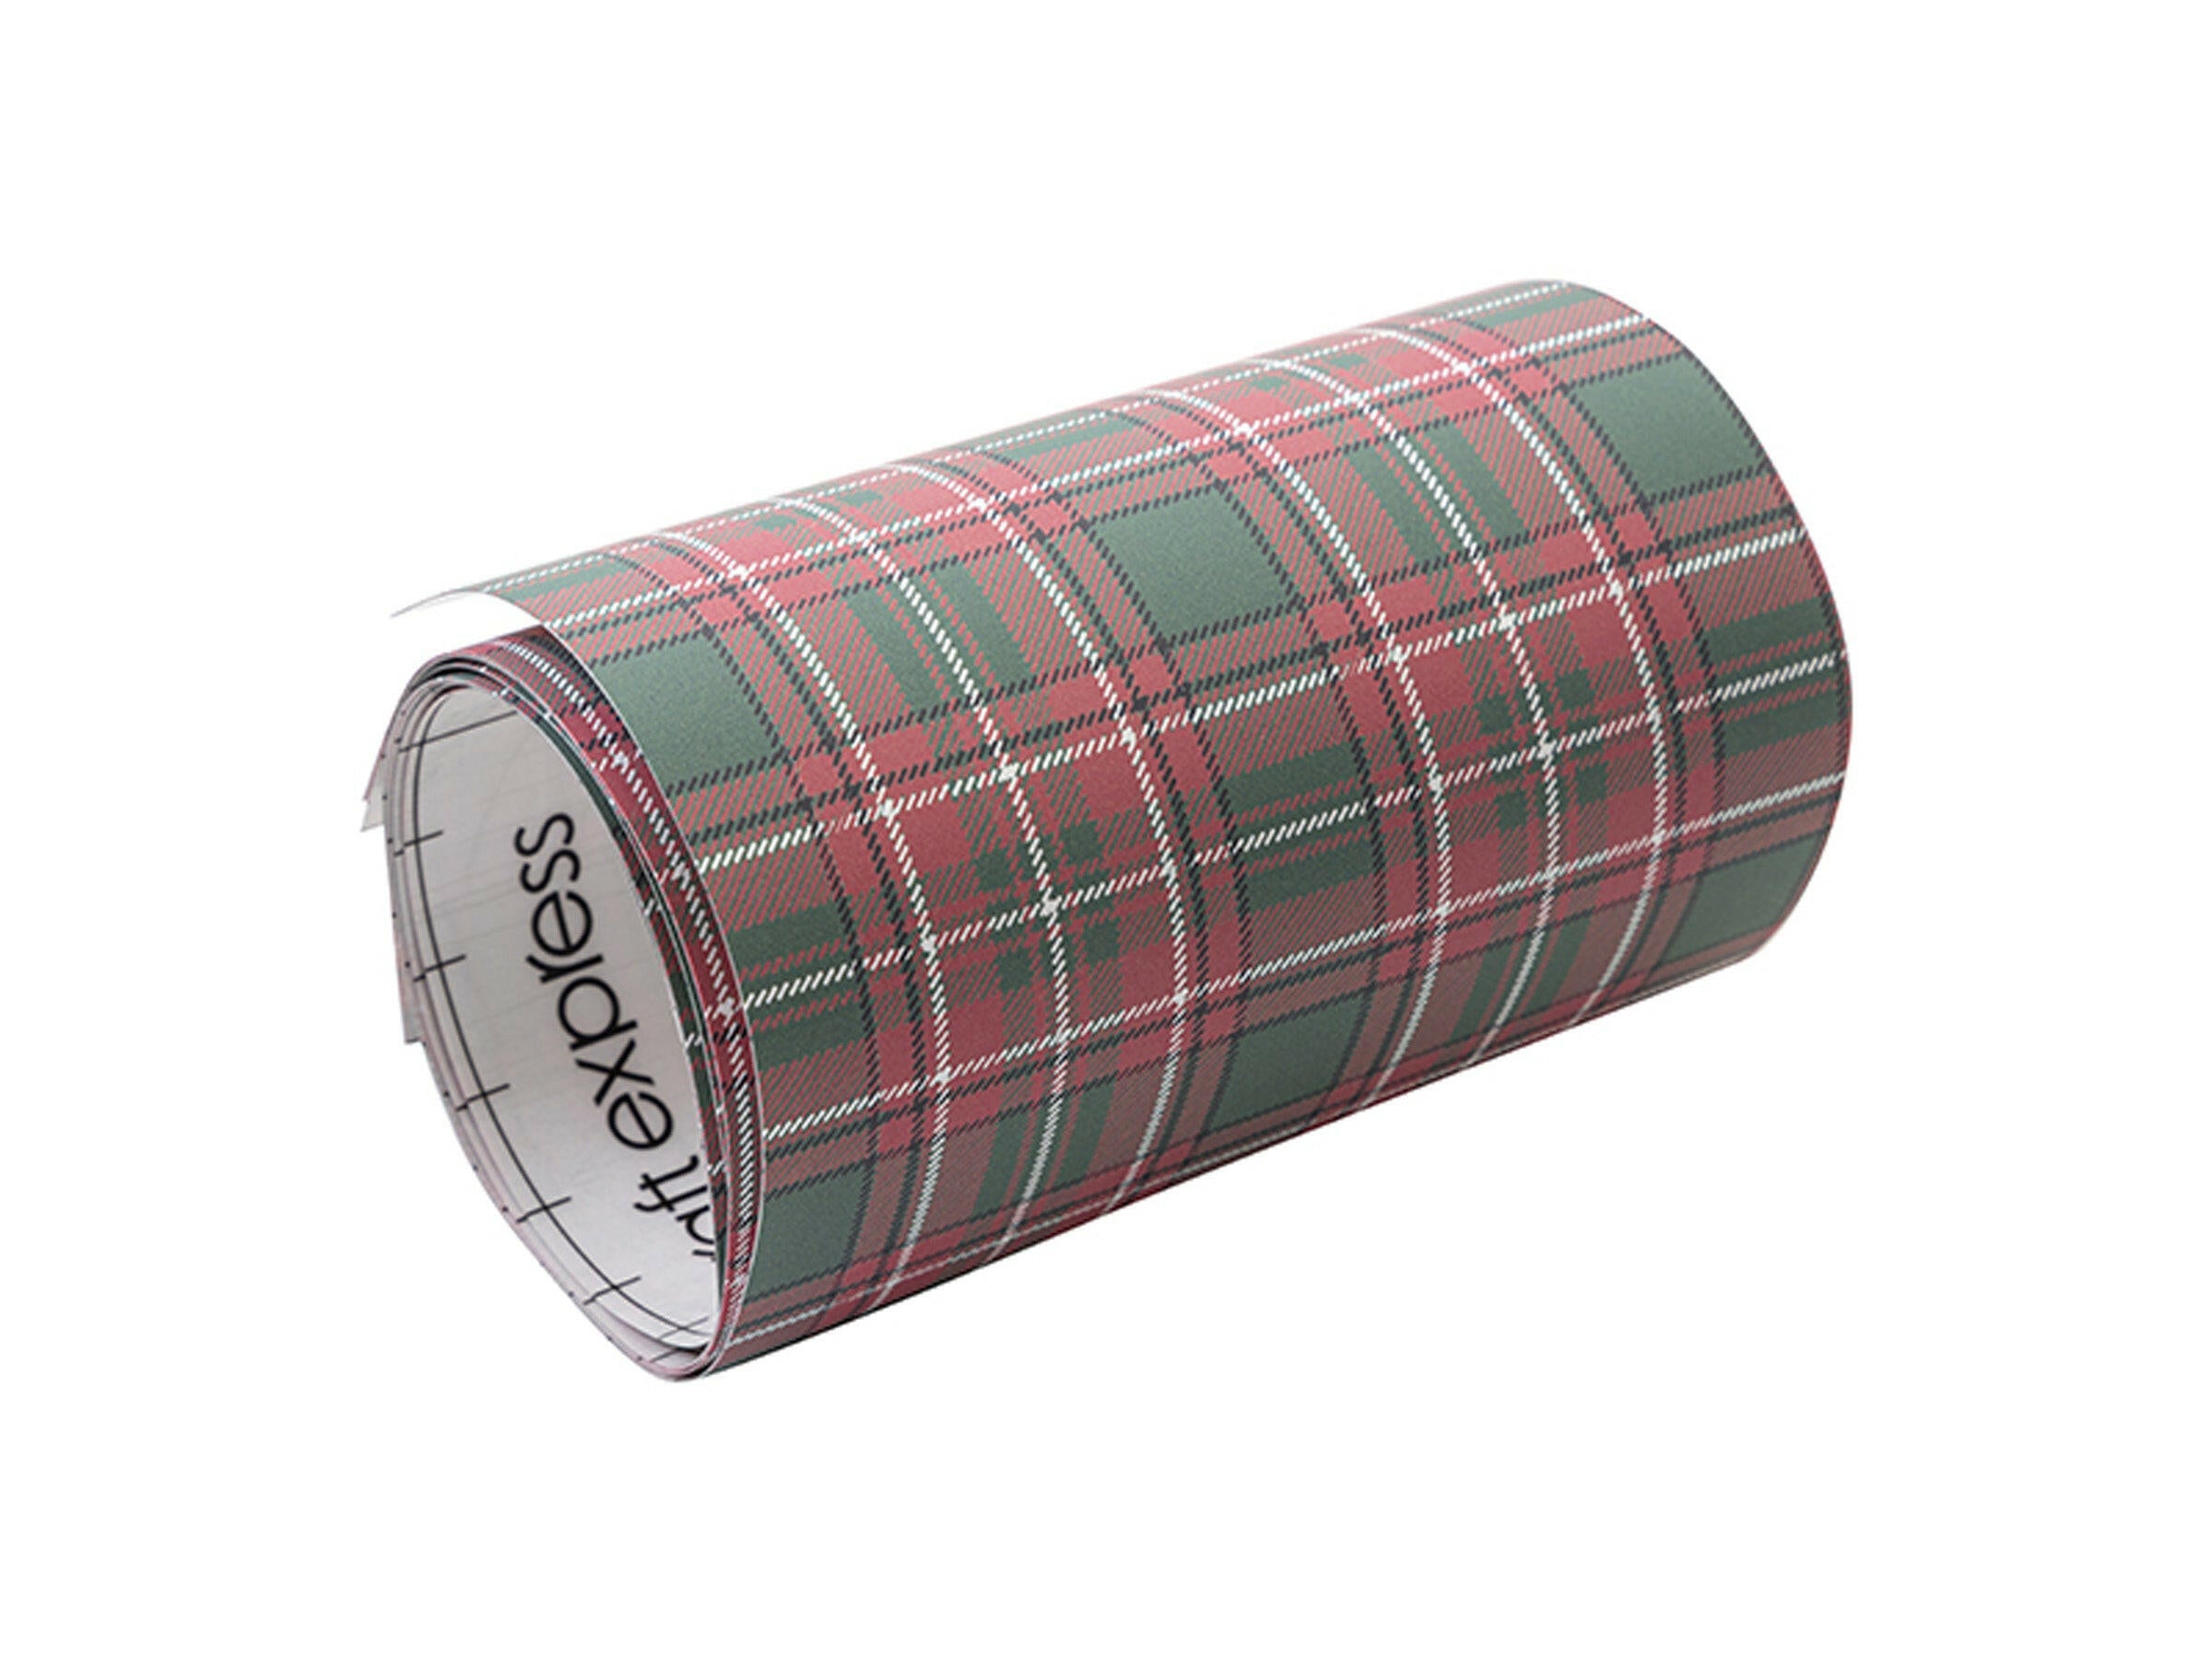 4.5" x 12" Sublimation Transfer Sheets - 4 Pack.